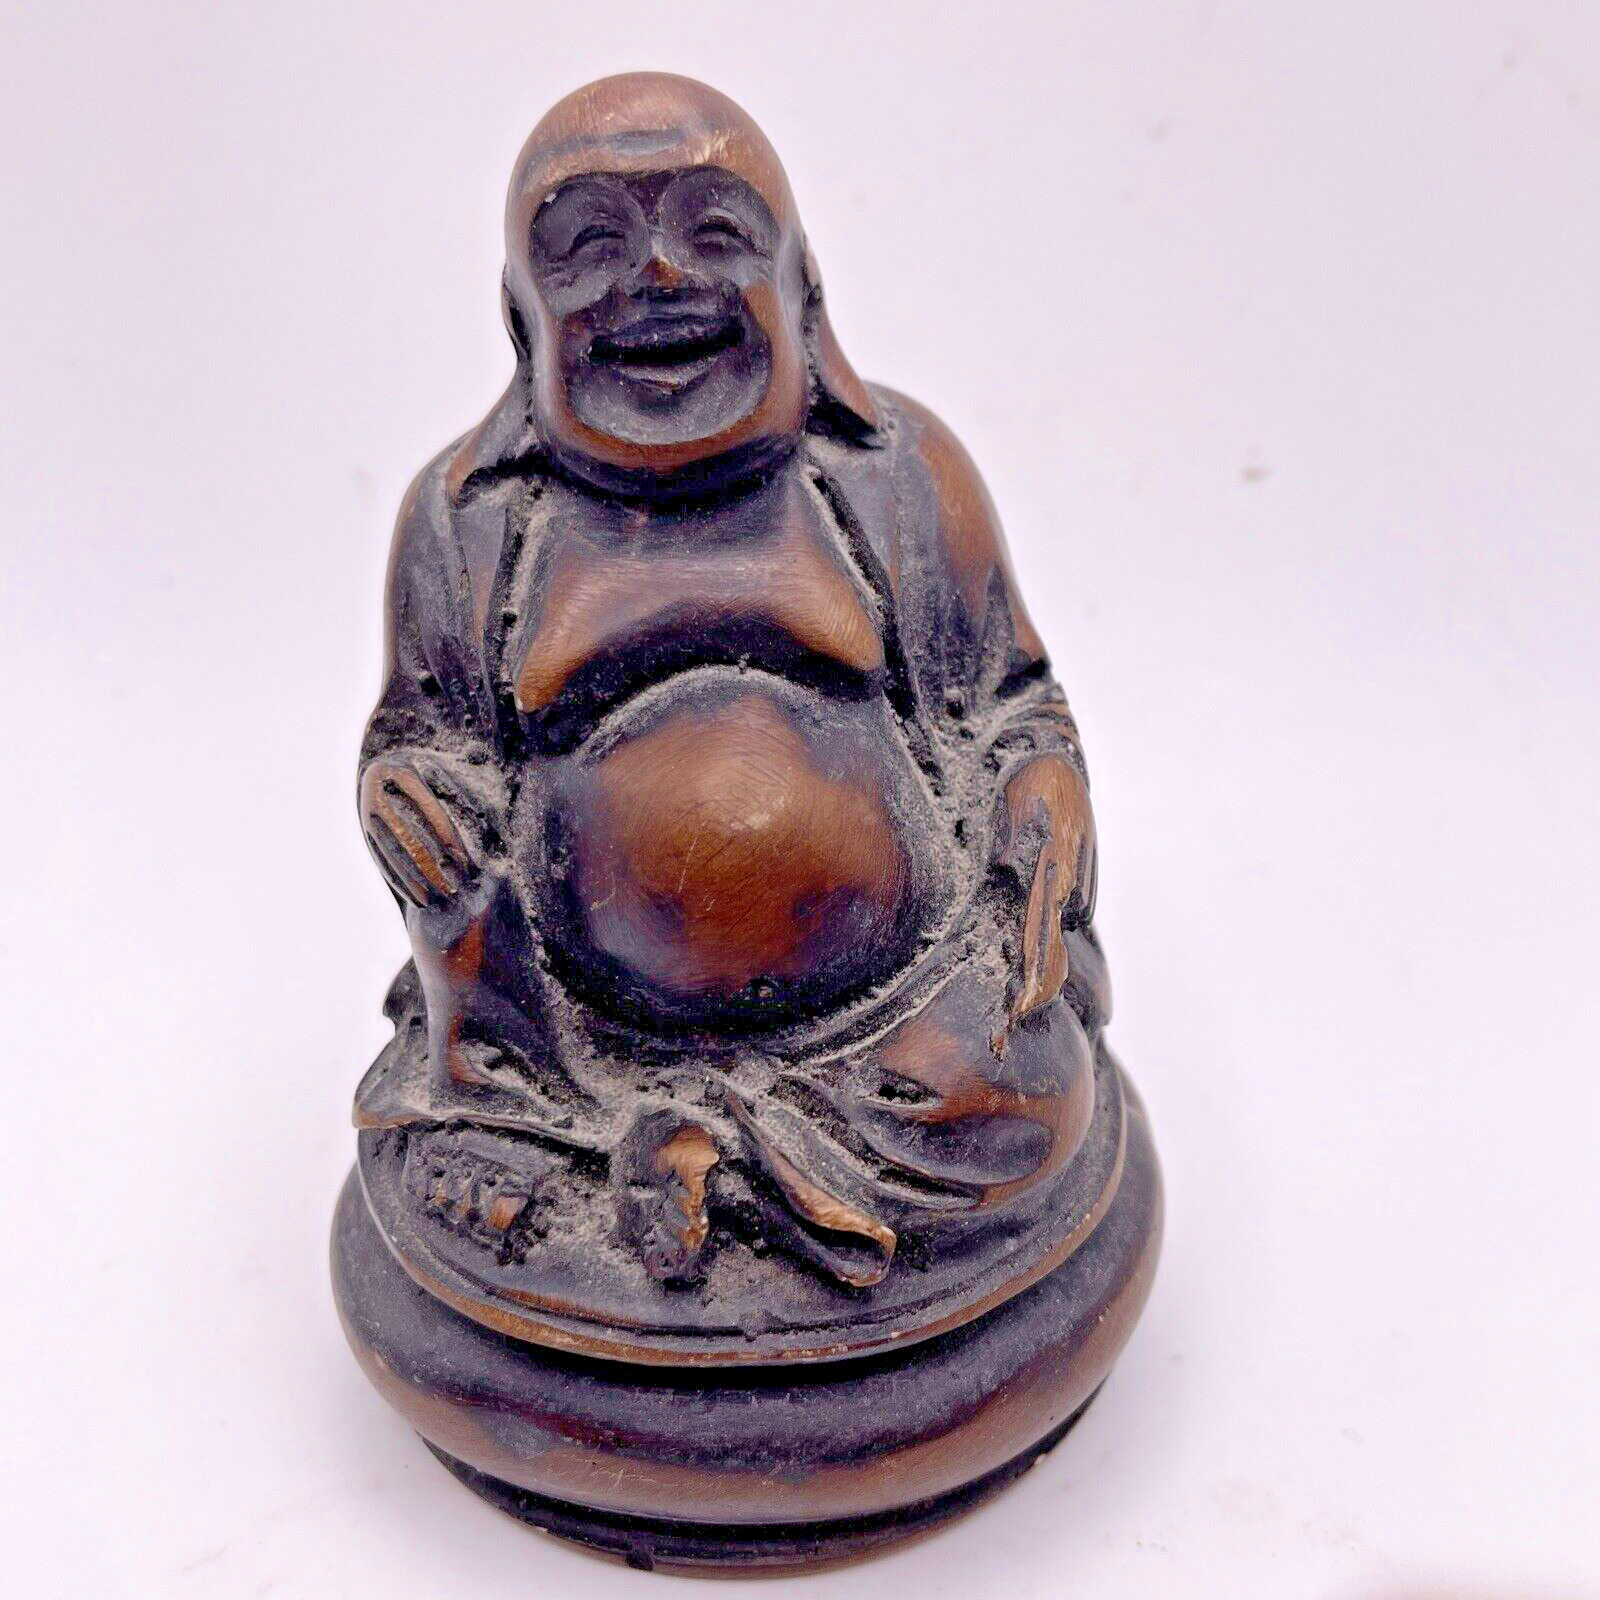 Happy Laughing Buddha Statue Figurine 3” Carved Wood Resin or Stone Miniature